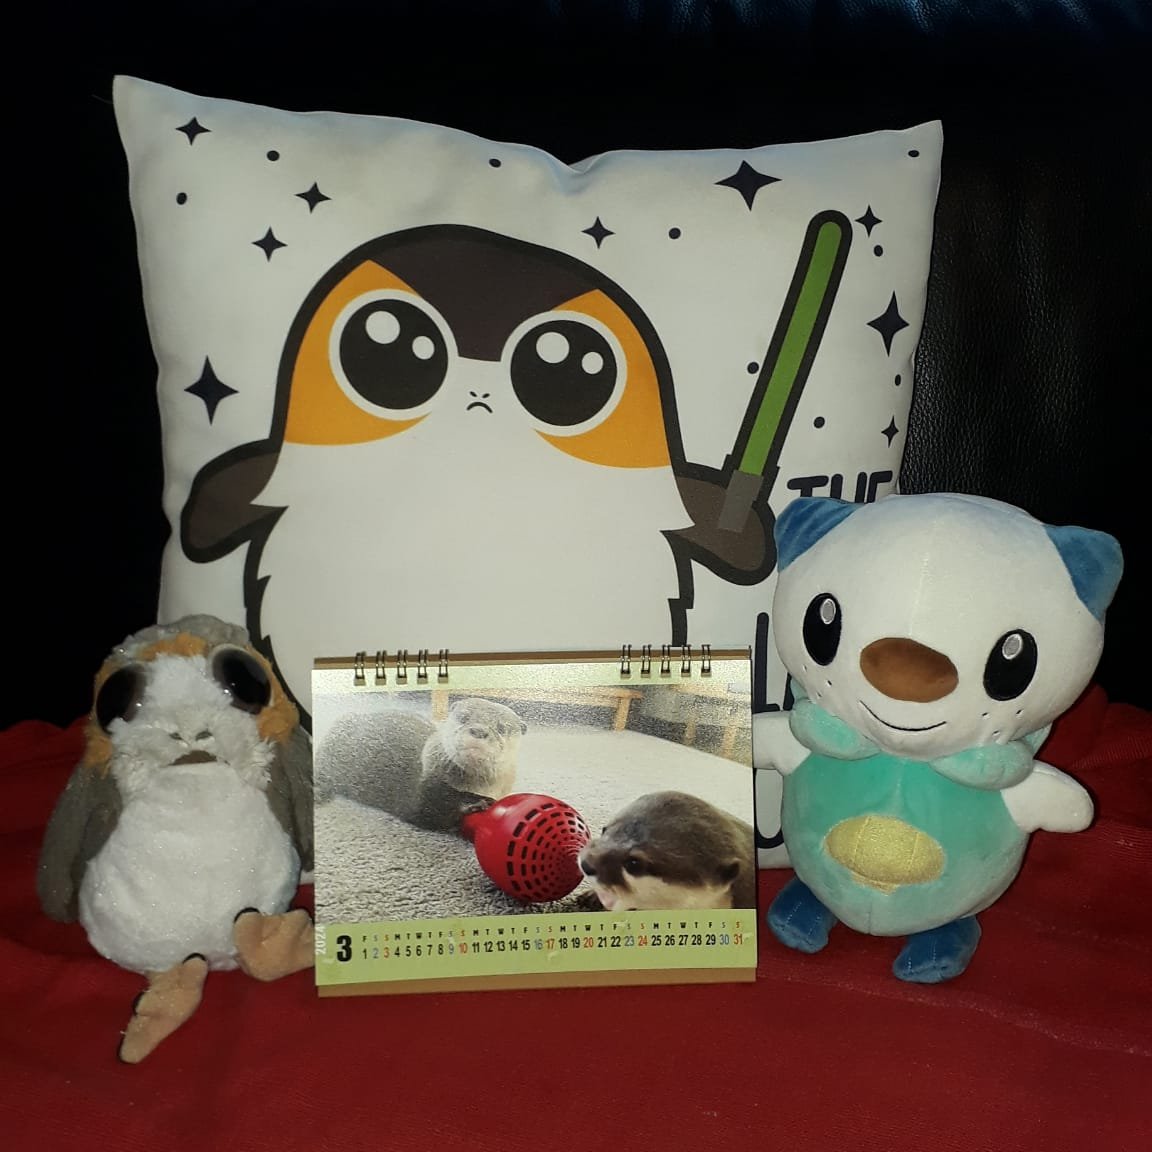 Moin moin! I am so sorry, I not was able to make these posts earlier. But it is time for me and my Japanese pal Mister Sugimori to show you the last four motives of the official Kotsumet calendar. I love Hana dressed up for the Year of the Dragon! 😍 #porg #porgs #PorgeanEmpire